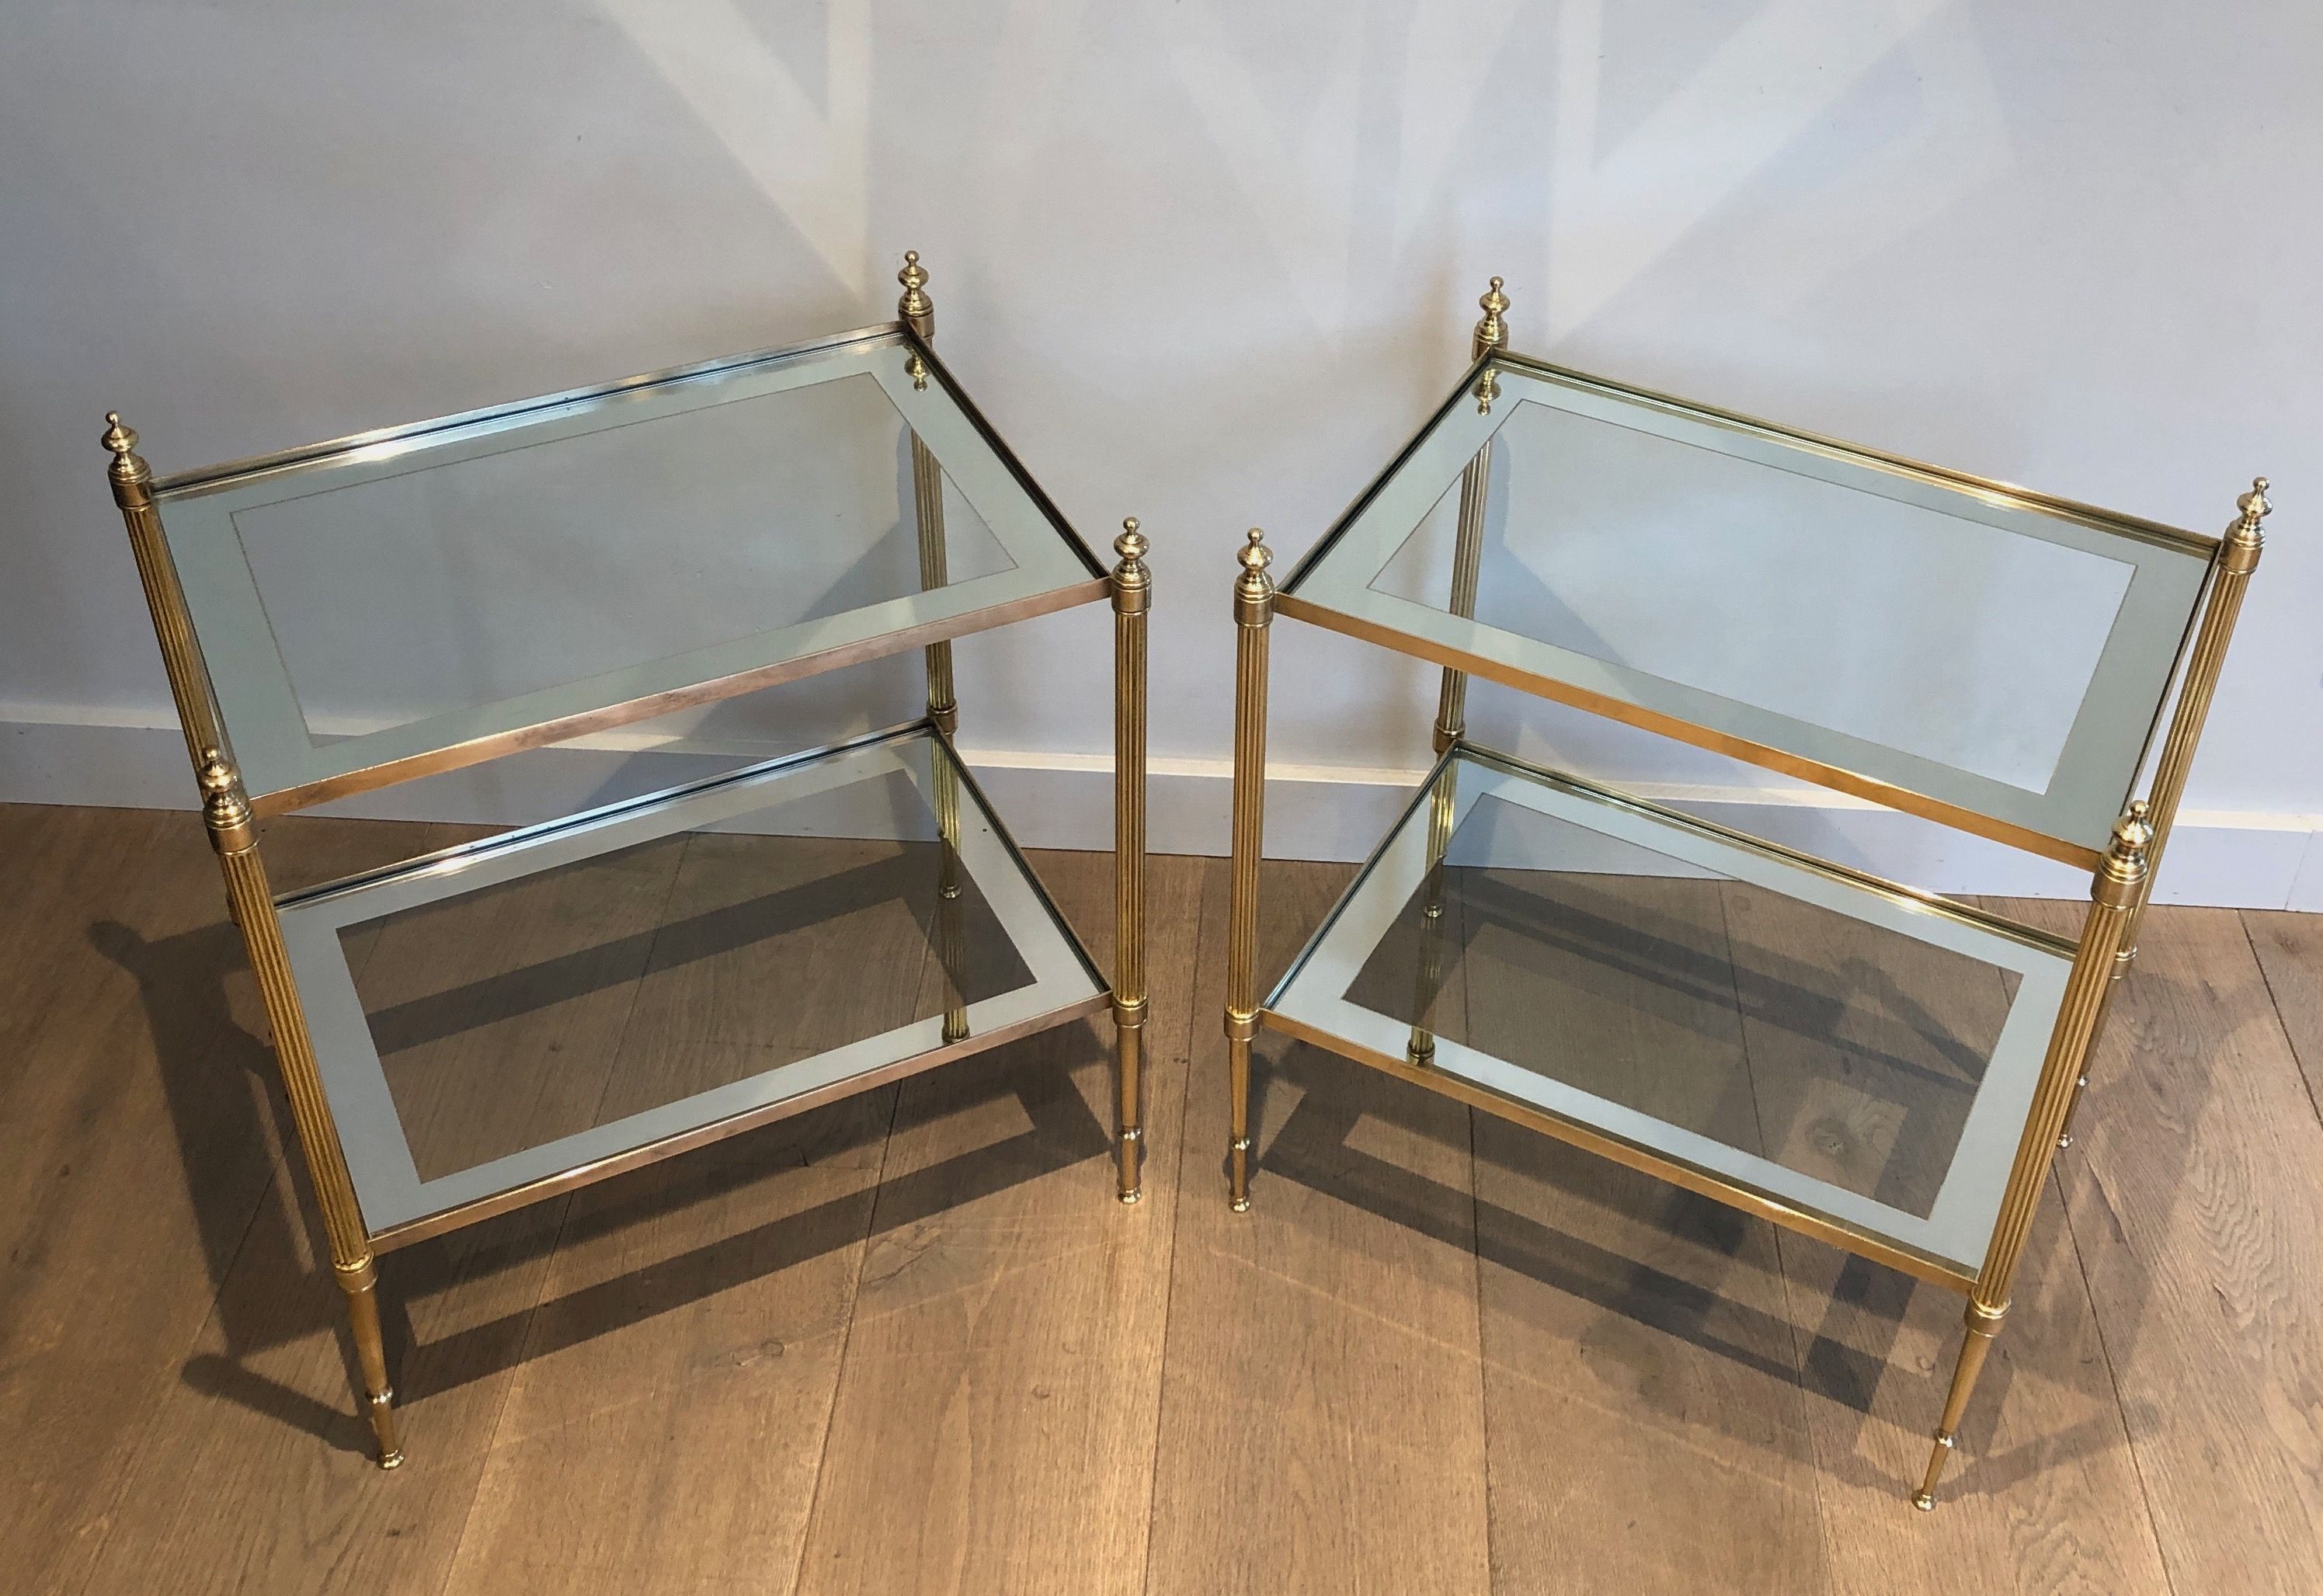 Pair of Neoclassical Style Brass Side Tables by Maison Jansen